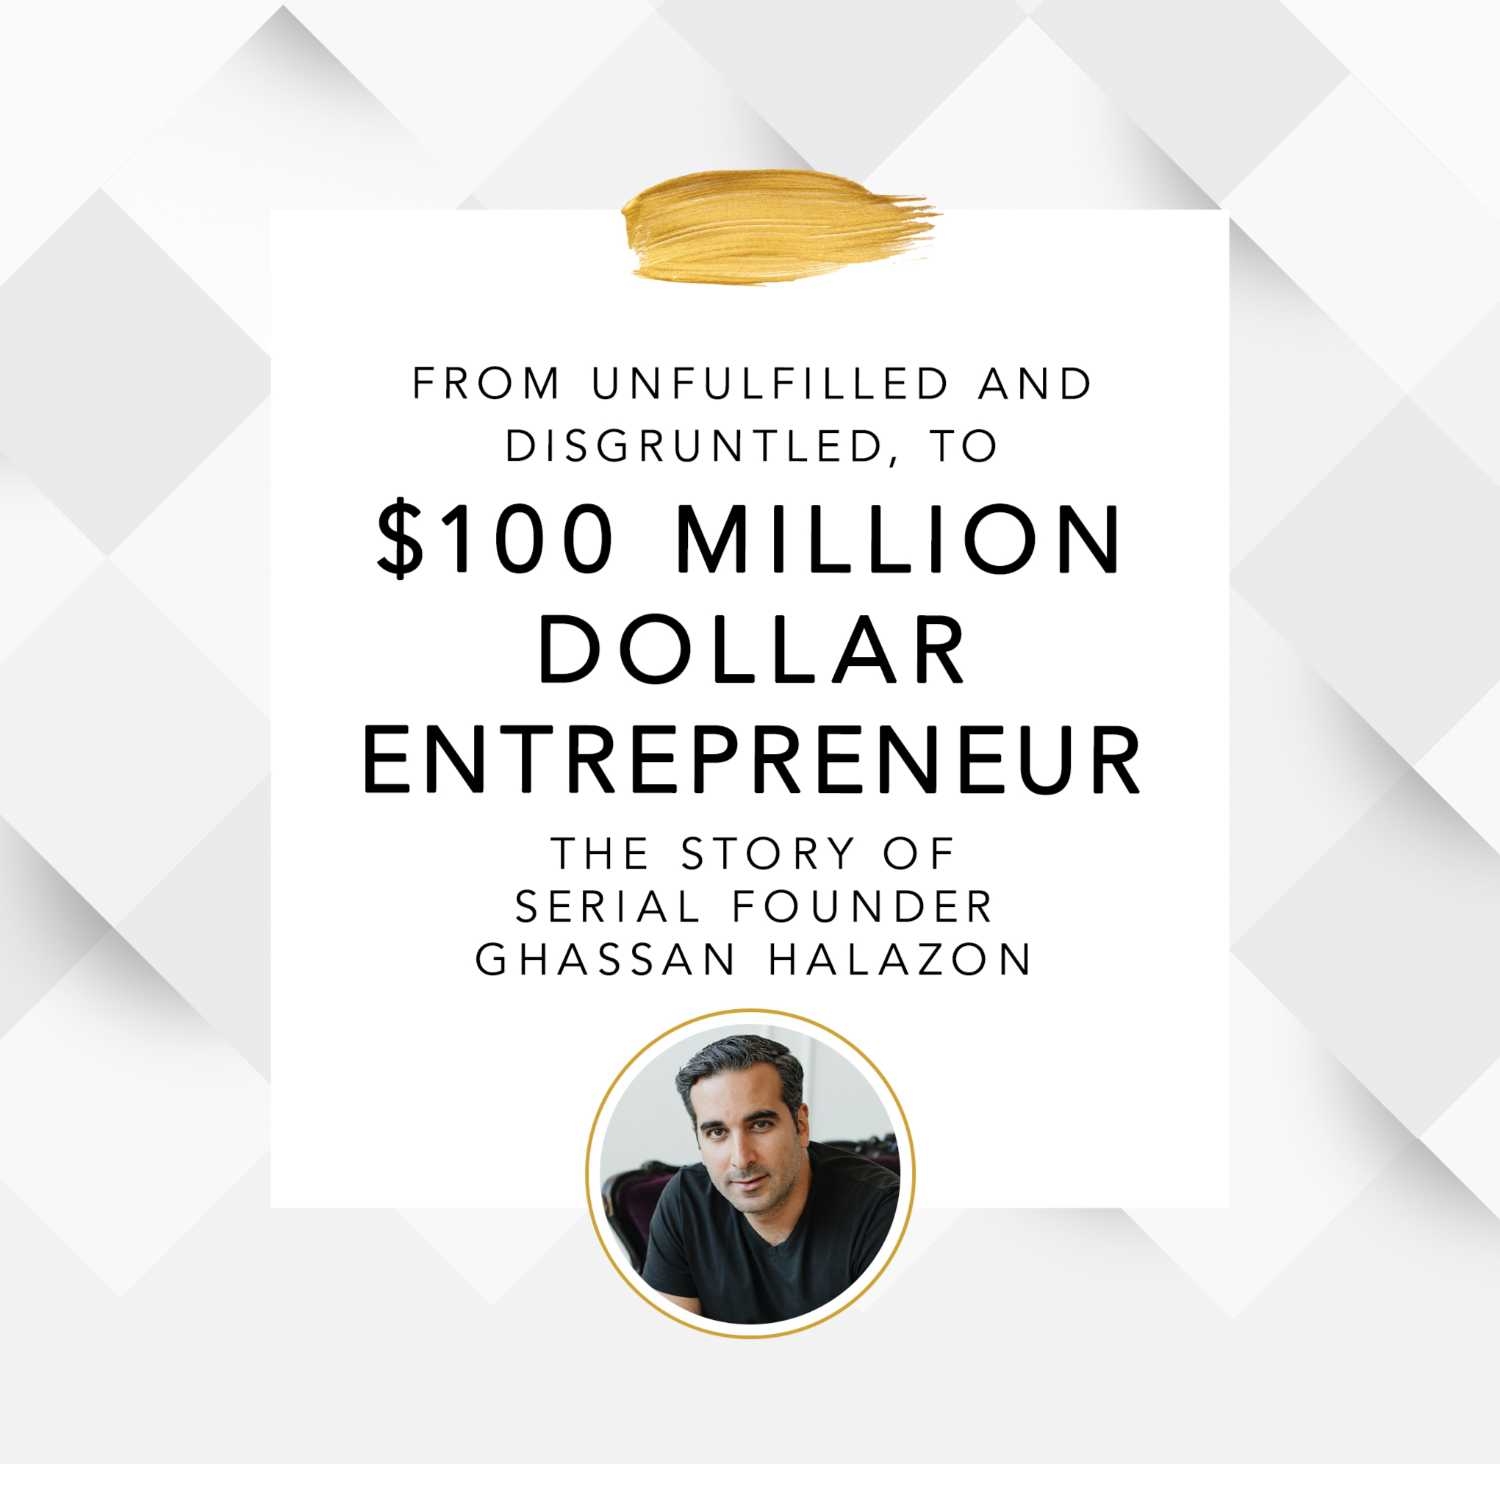 The $100 Million Dollar Founder, A Chat With Serial Founder Ghassan Halazon